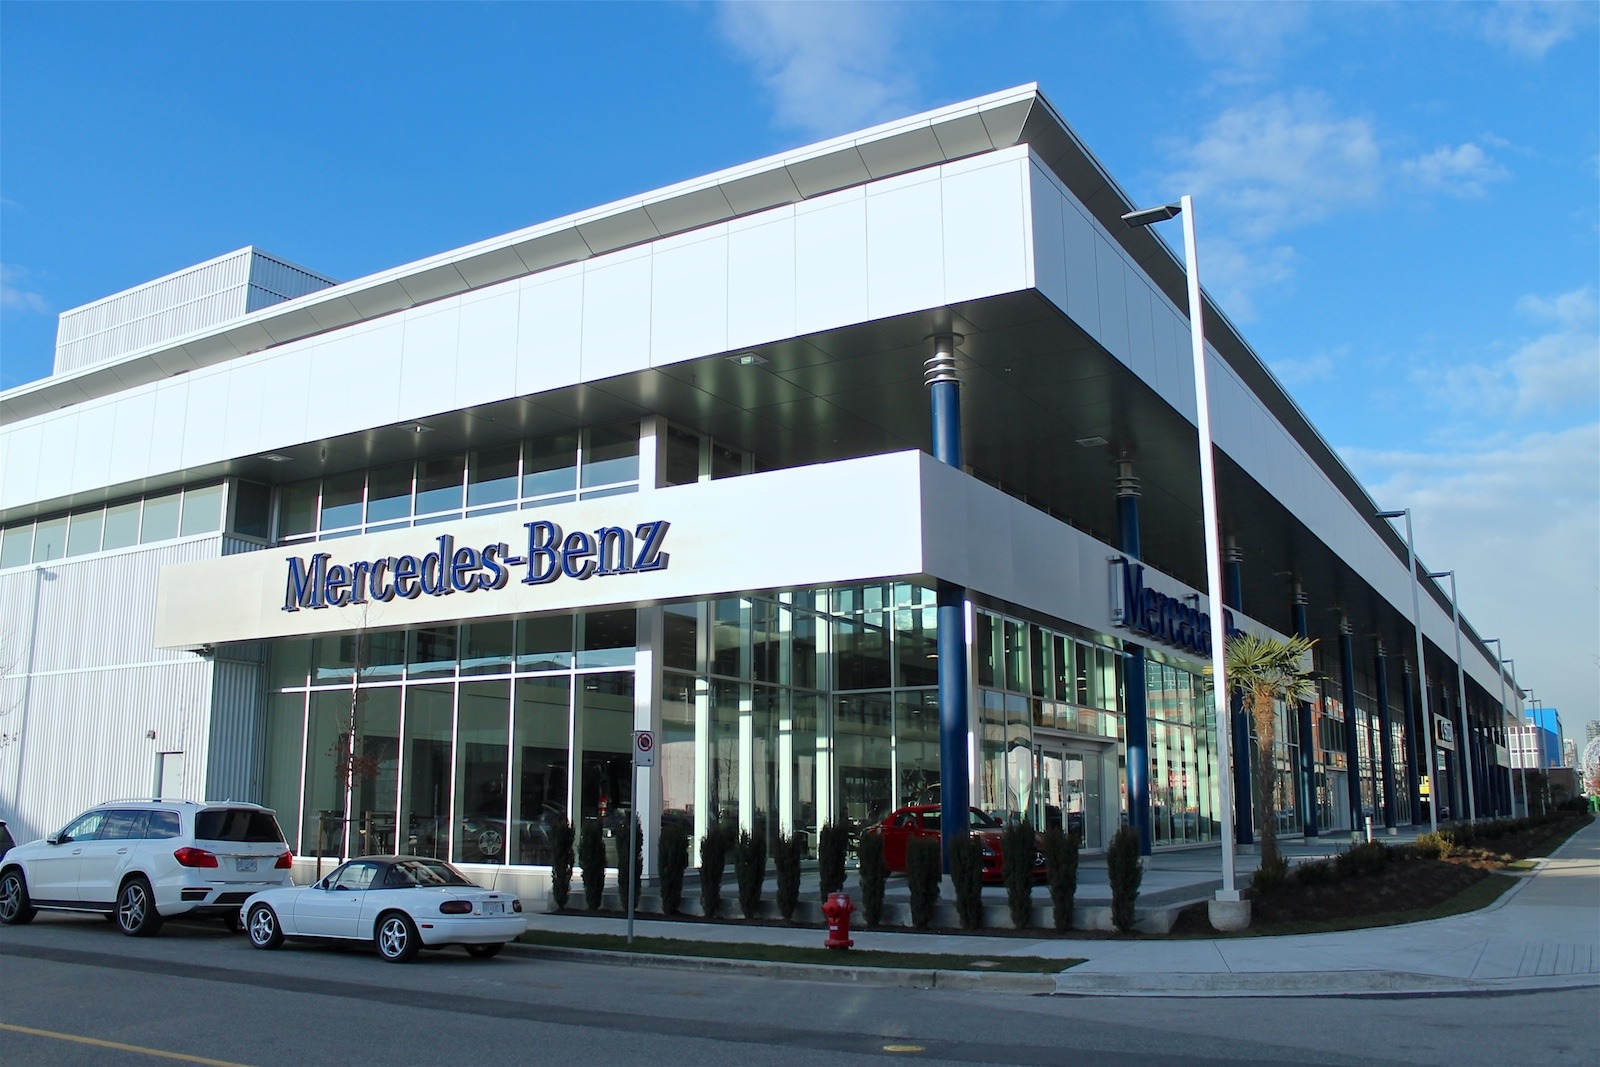 Robertson-Walls-Ceilings-Completed-Projects-Luxury-Car-Dealerships-Mercedes-Benz-Vancouver-1 Mercedes-Benz Vancouver